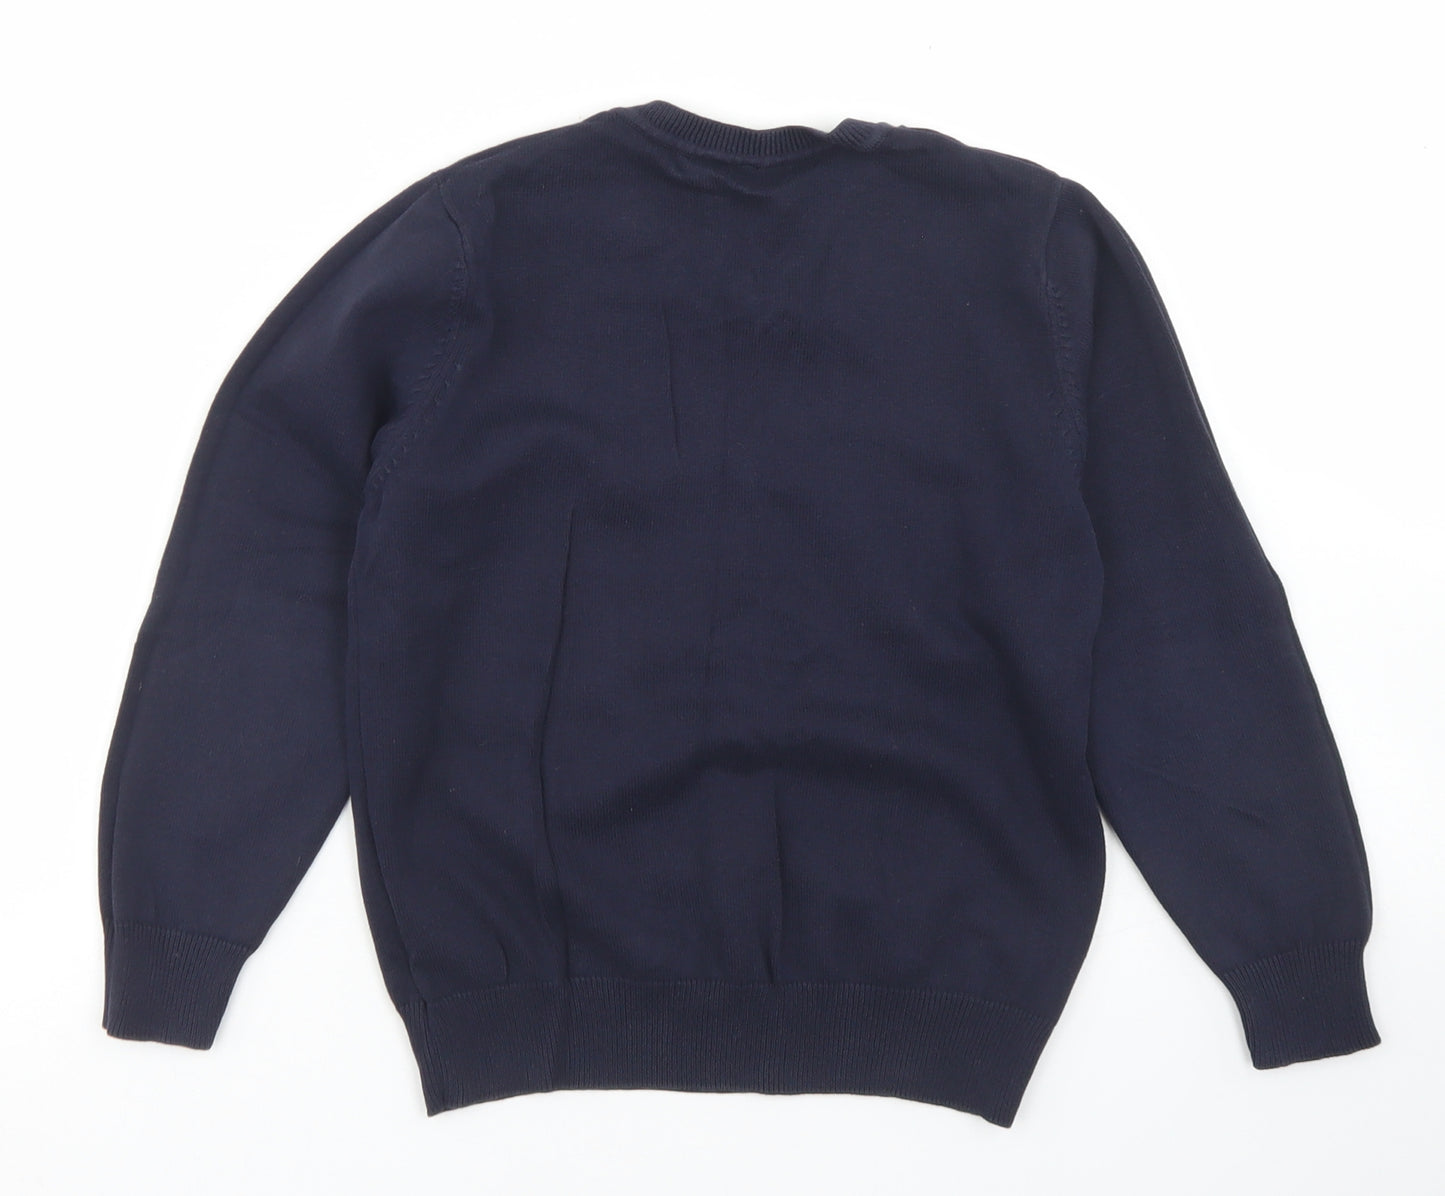 George Boys Blue V-Neck  Cotton Pullover Jumper Size 6-7 Years   - School Wear